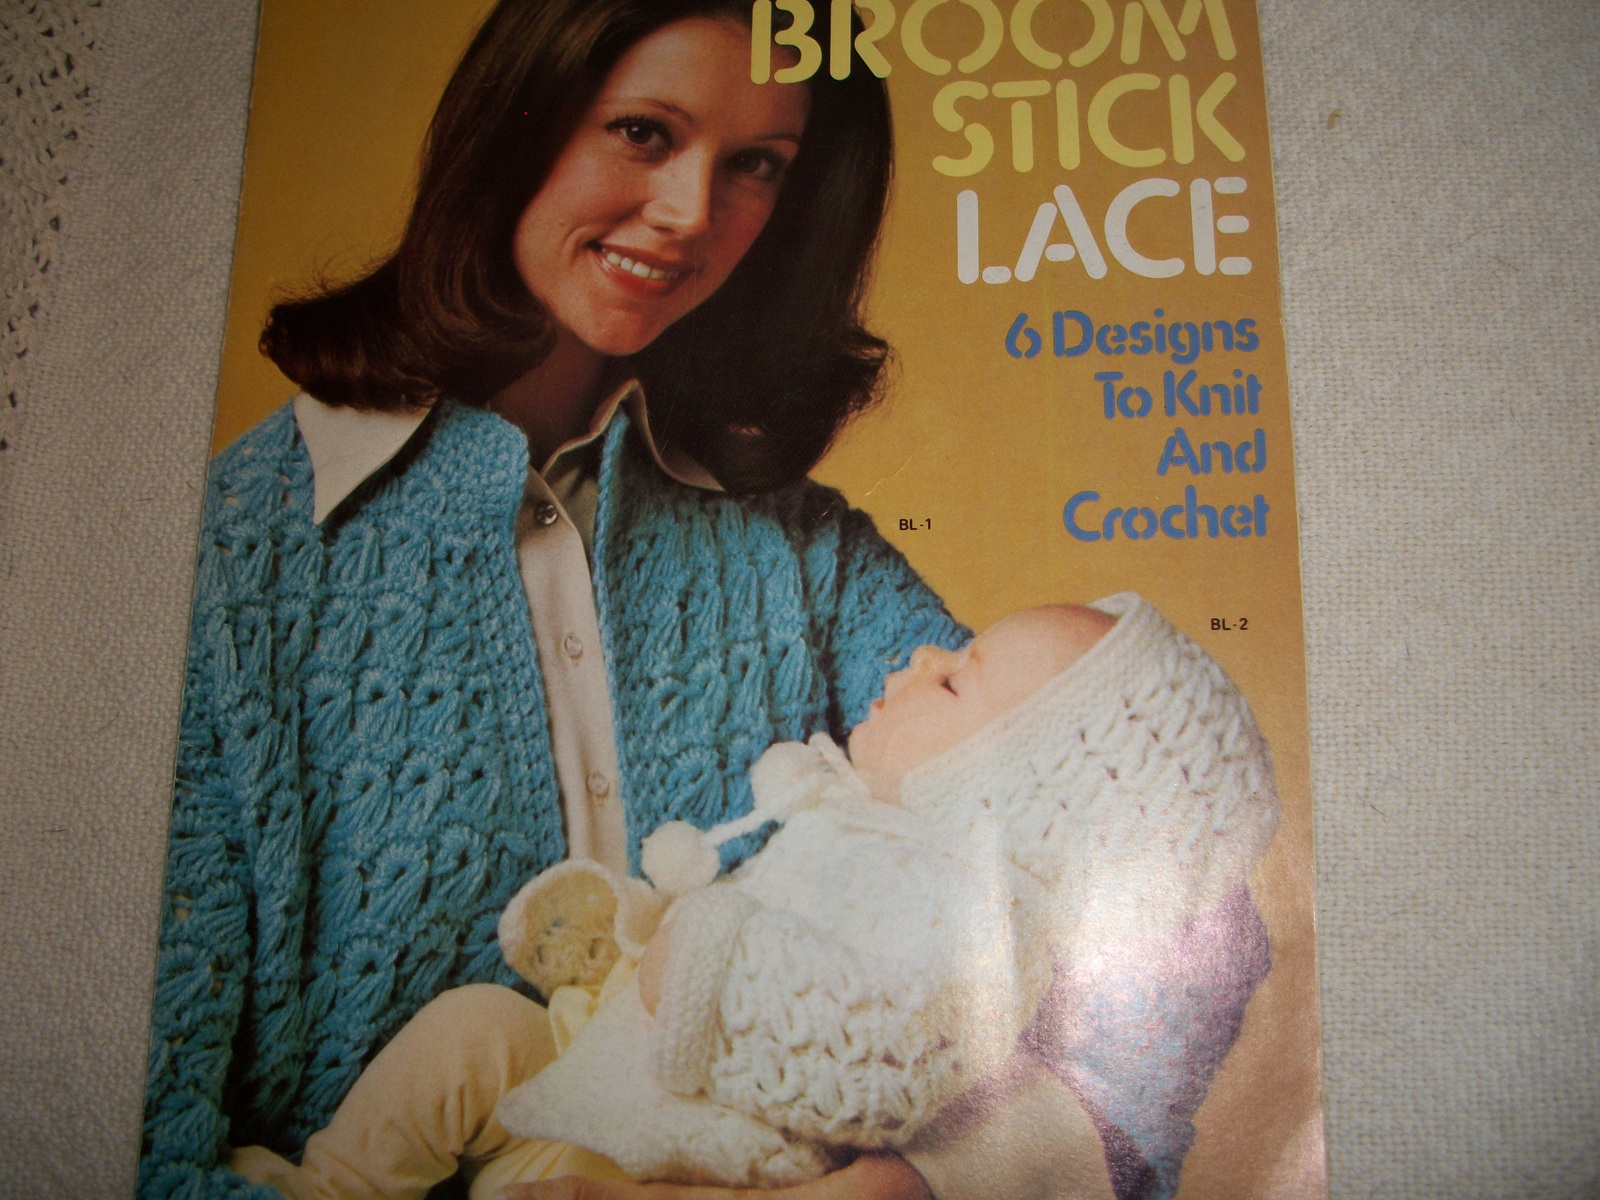 Broom Stick Lace: 6 Designs To Knit And Crochet - $7.00